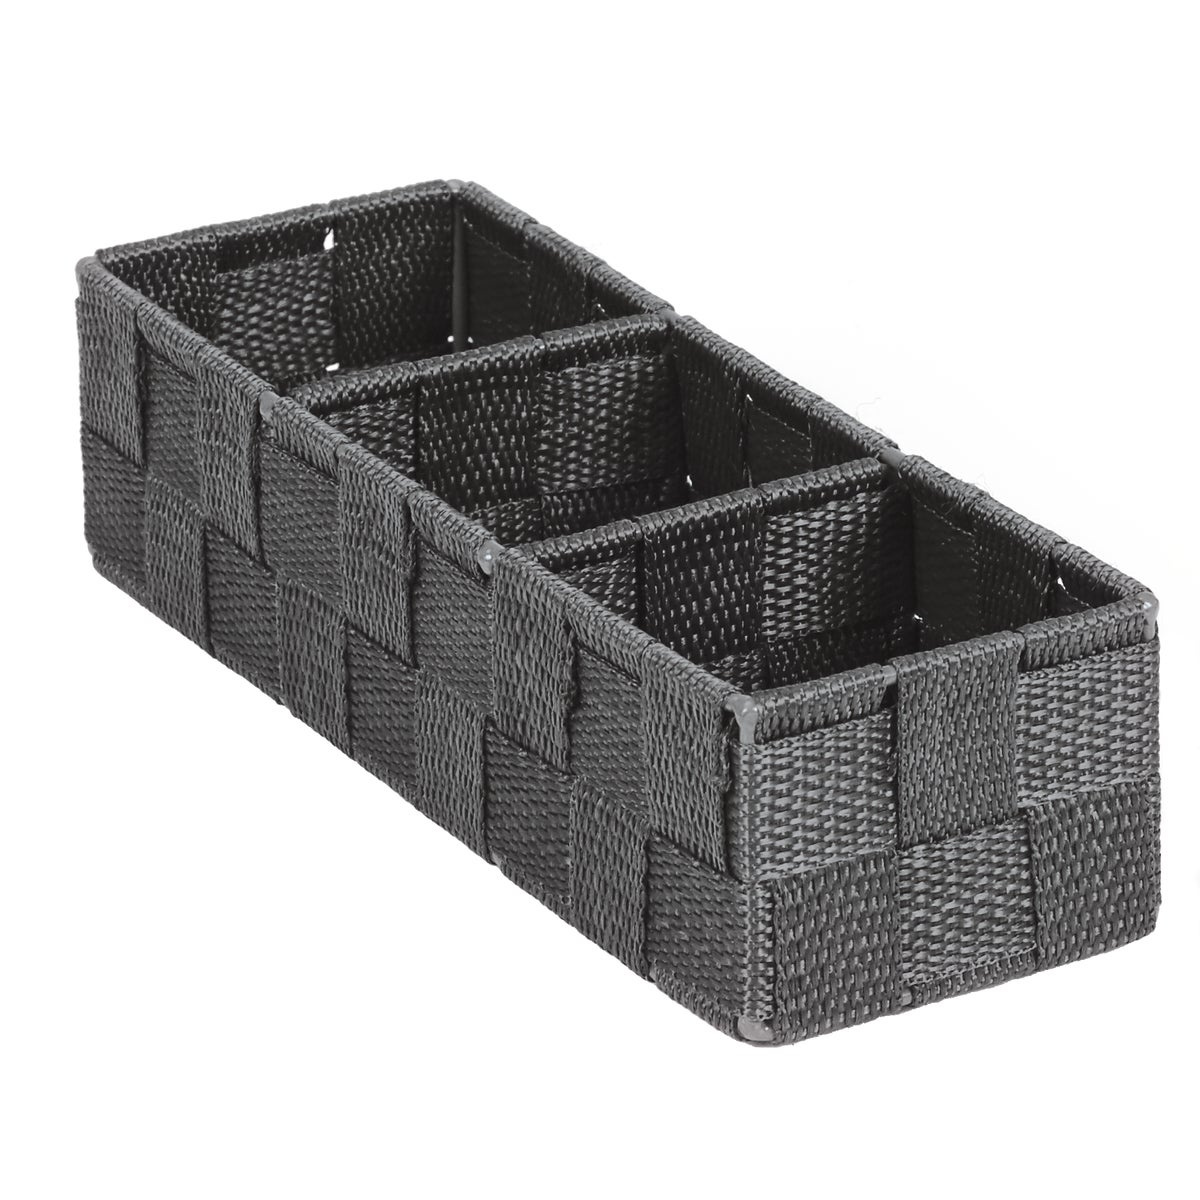 Home Impressions 3.25 In. W. x 2.25 In. H. x 9.5 In. L. Woven Storage Tray, Gray